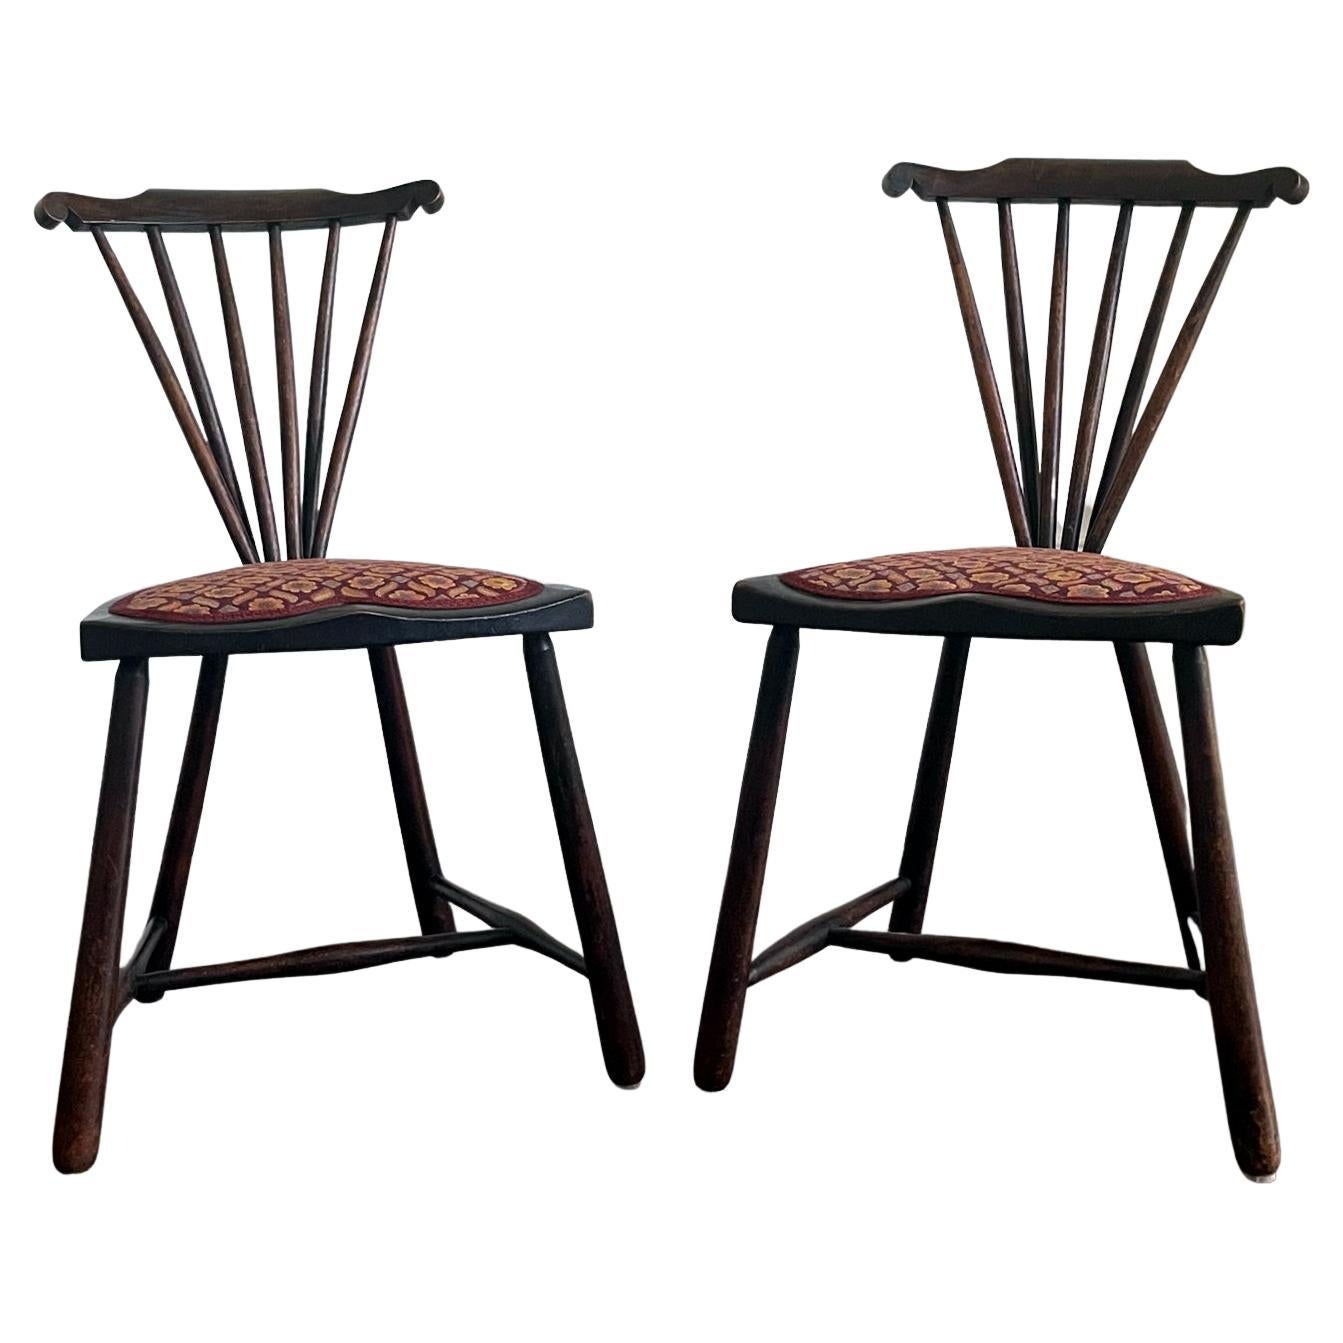 Rare Pair of Vienna Secession Modern Chairs by Adolf Loos For Sale